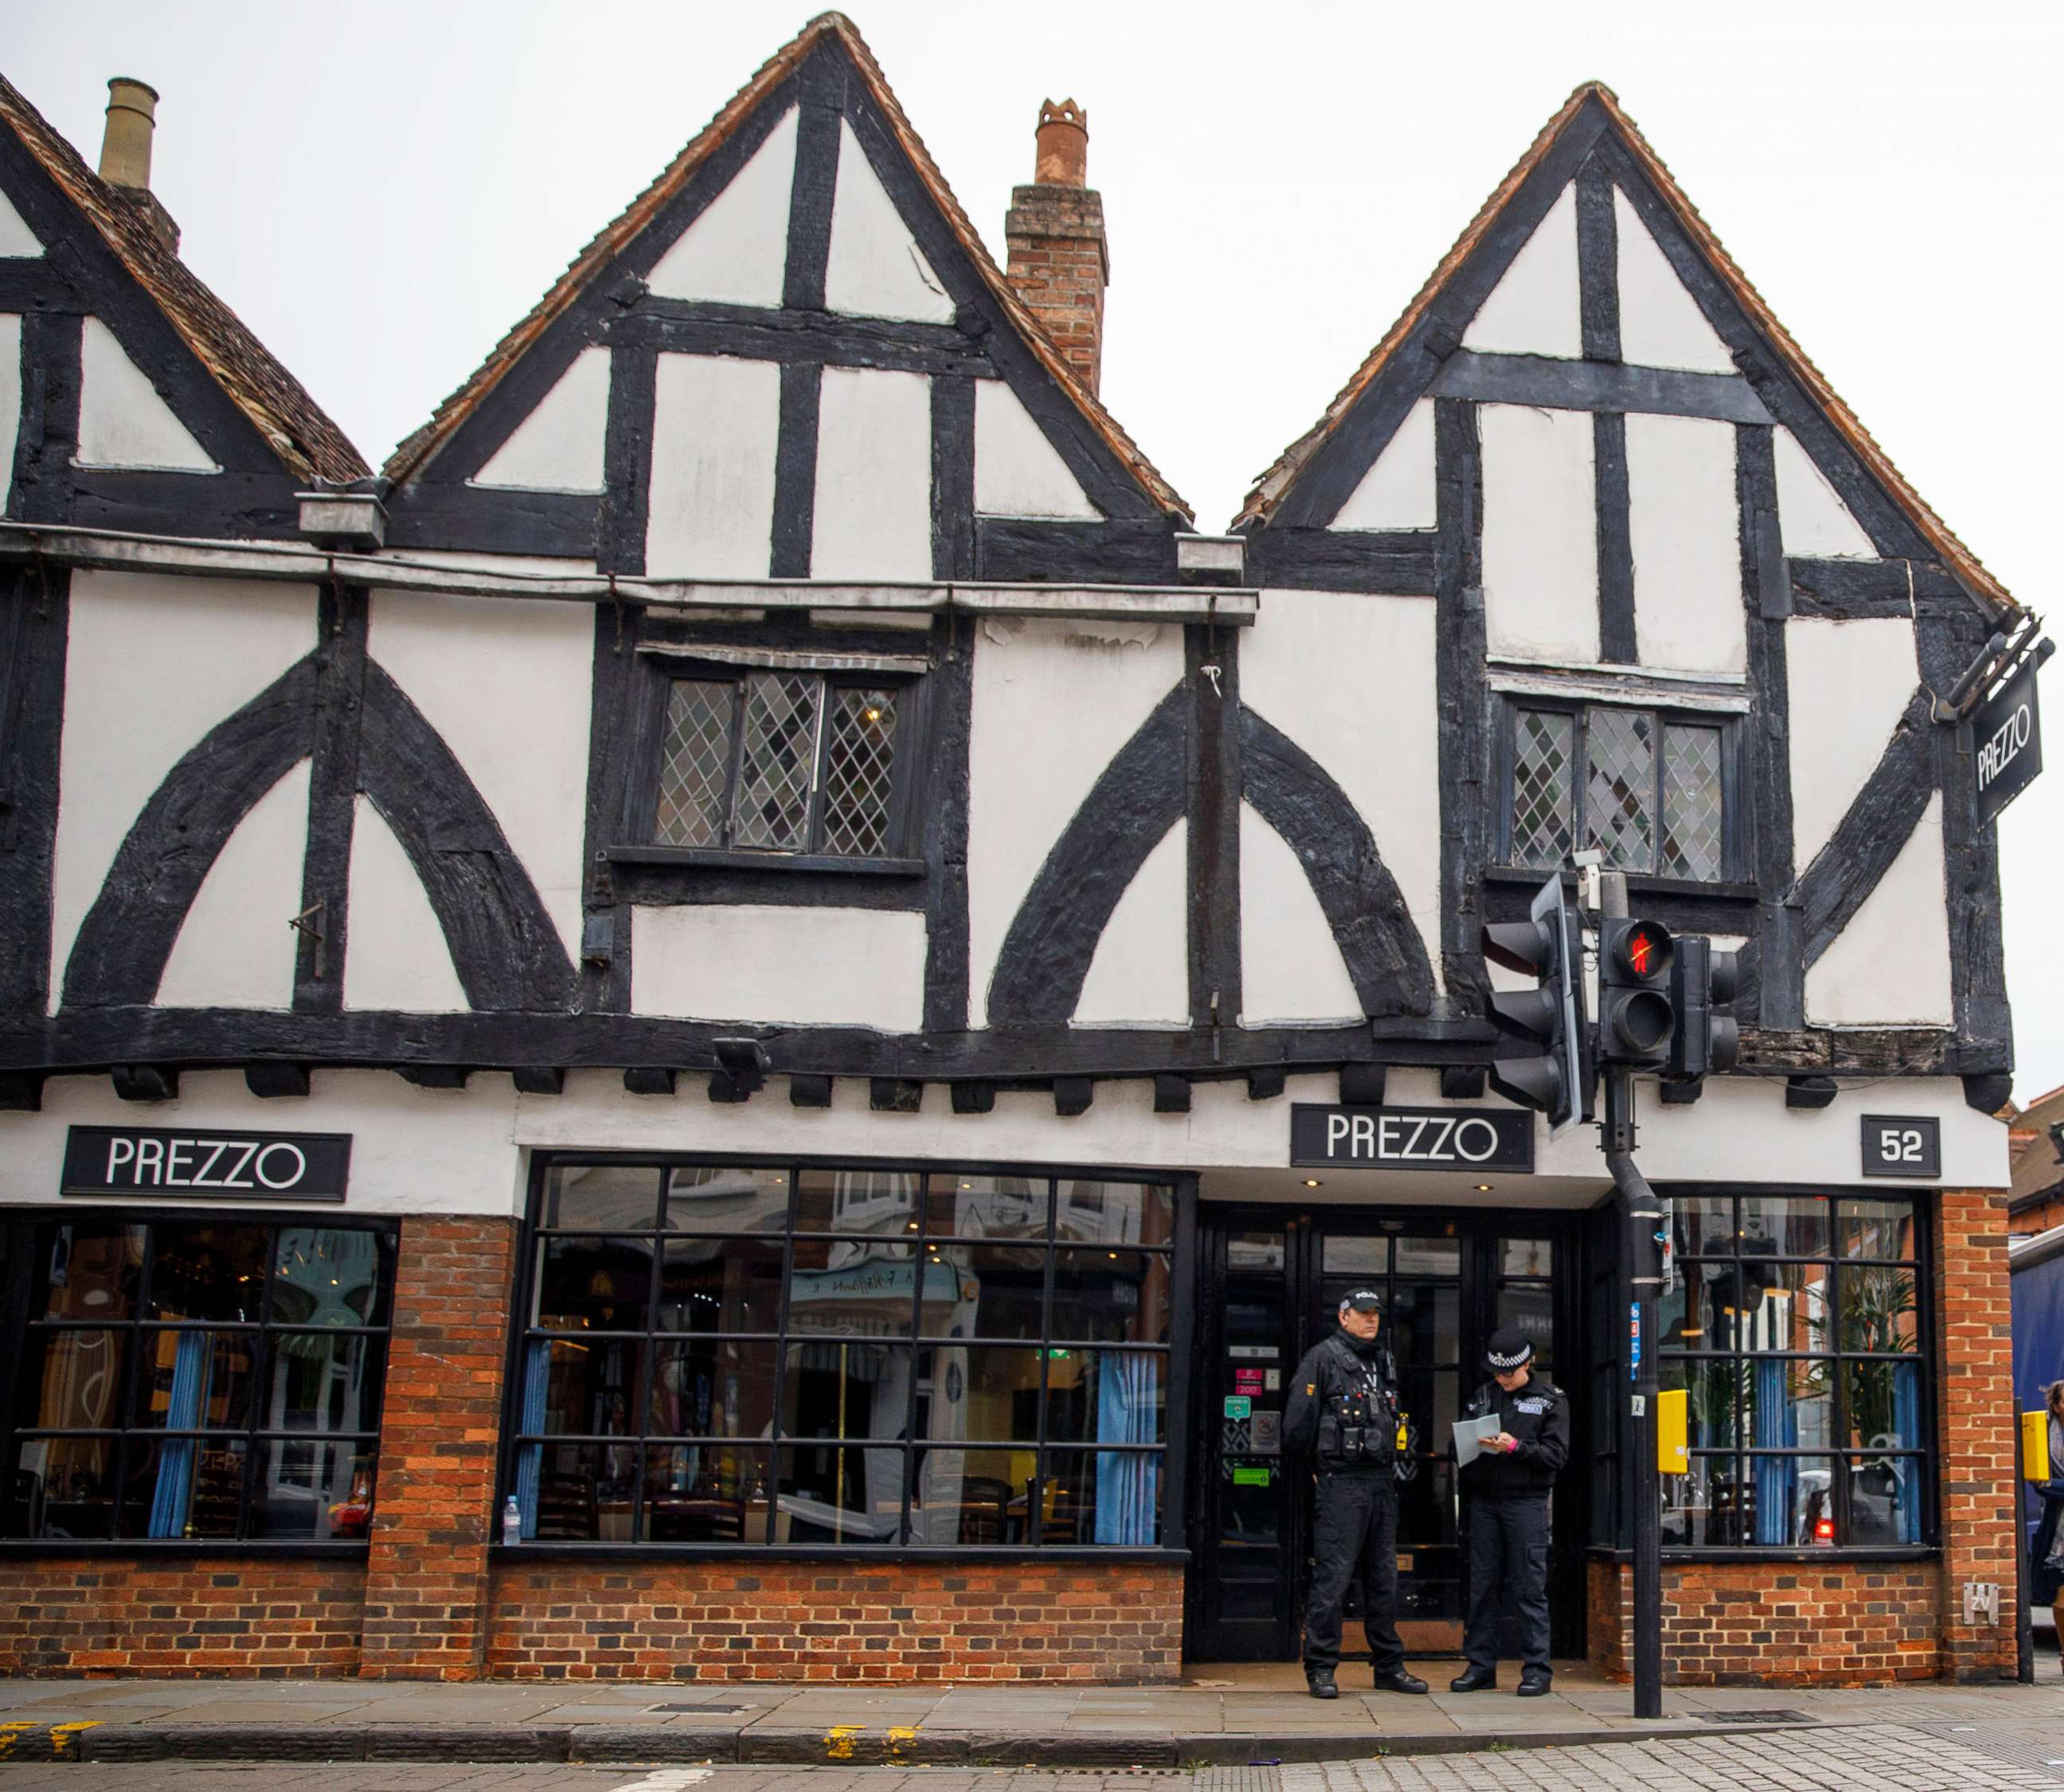 PHOTO: Police gather outside Prezzo restaurant which has been closed after two people became ill earlier this evening, Sept. 17, 2018 in Salisbury, England.